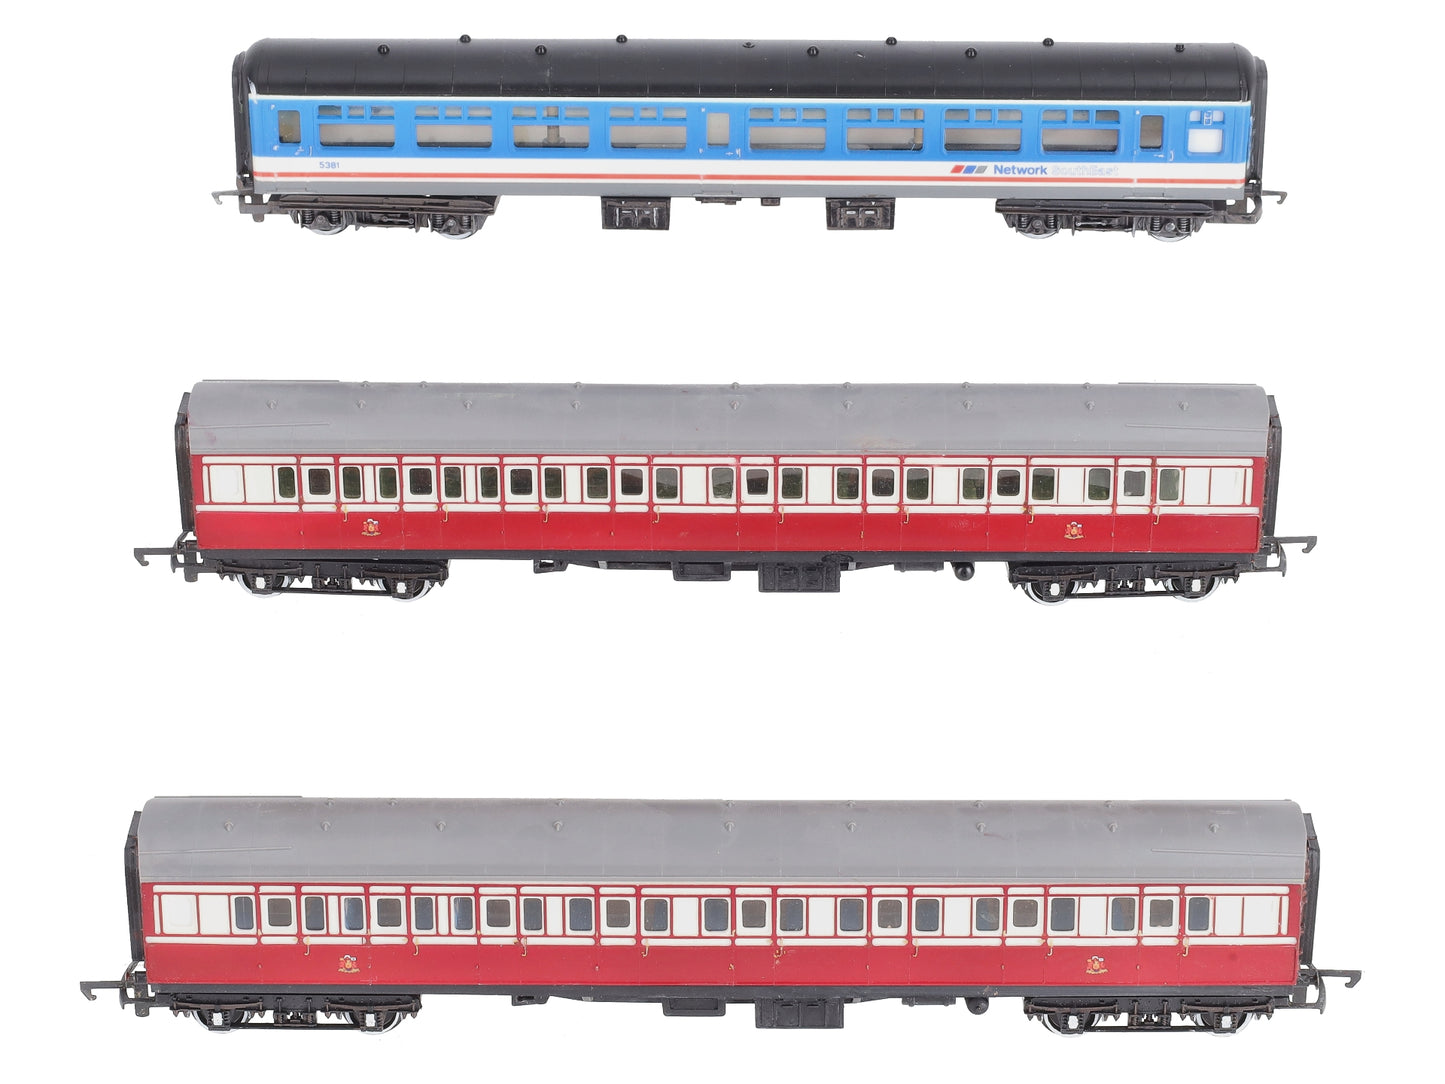 Hornby OO Scale Passenger Cars: 439, 427, 427 [3] VG/Box